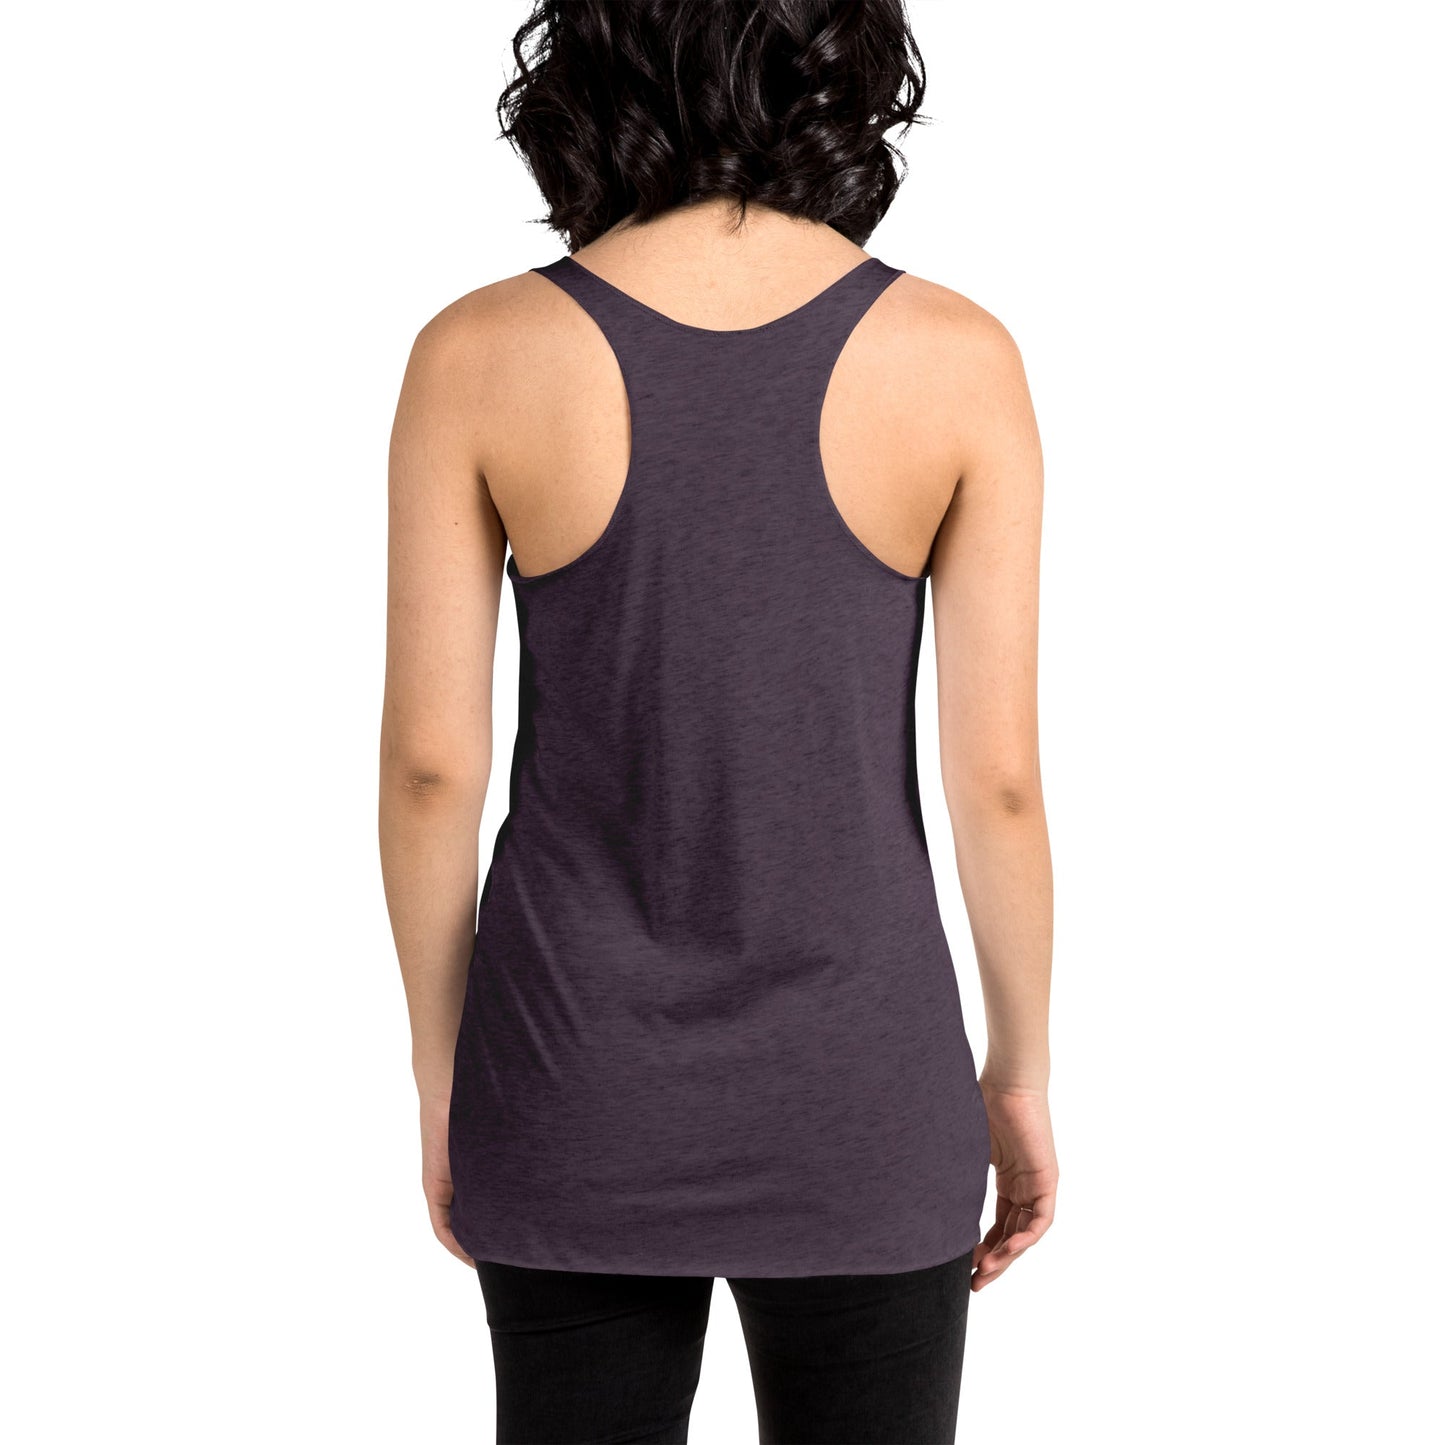 Inhale-Exhale - Racerback Graphic Tank Top